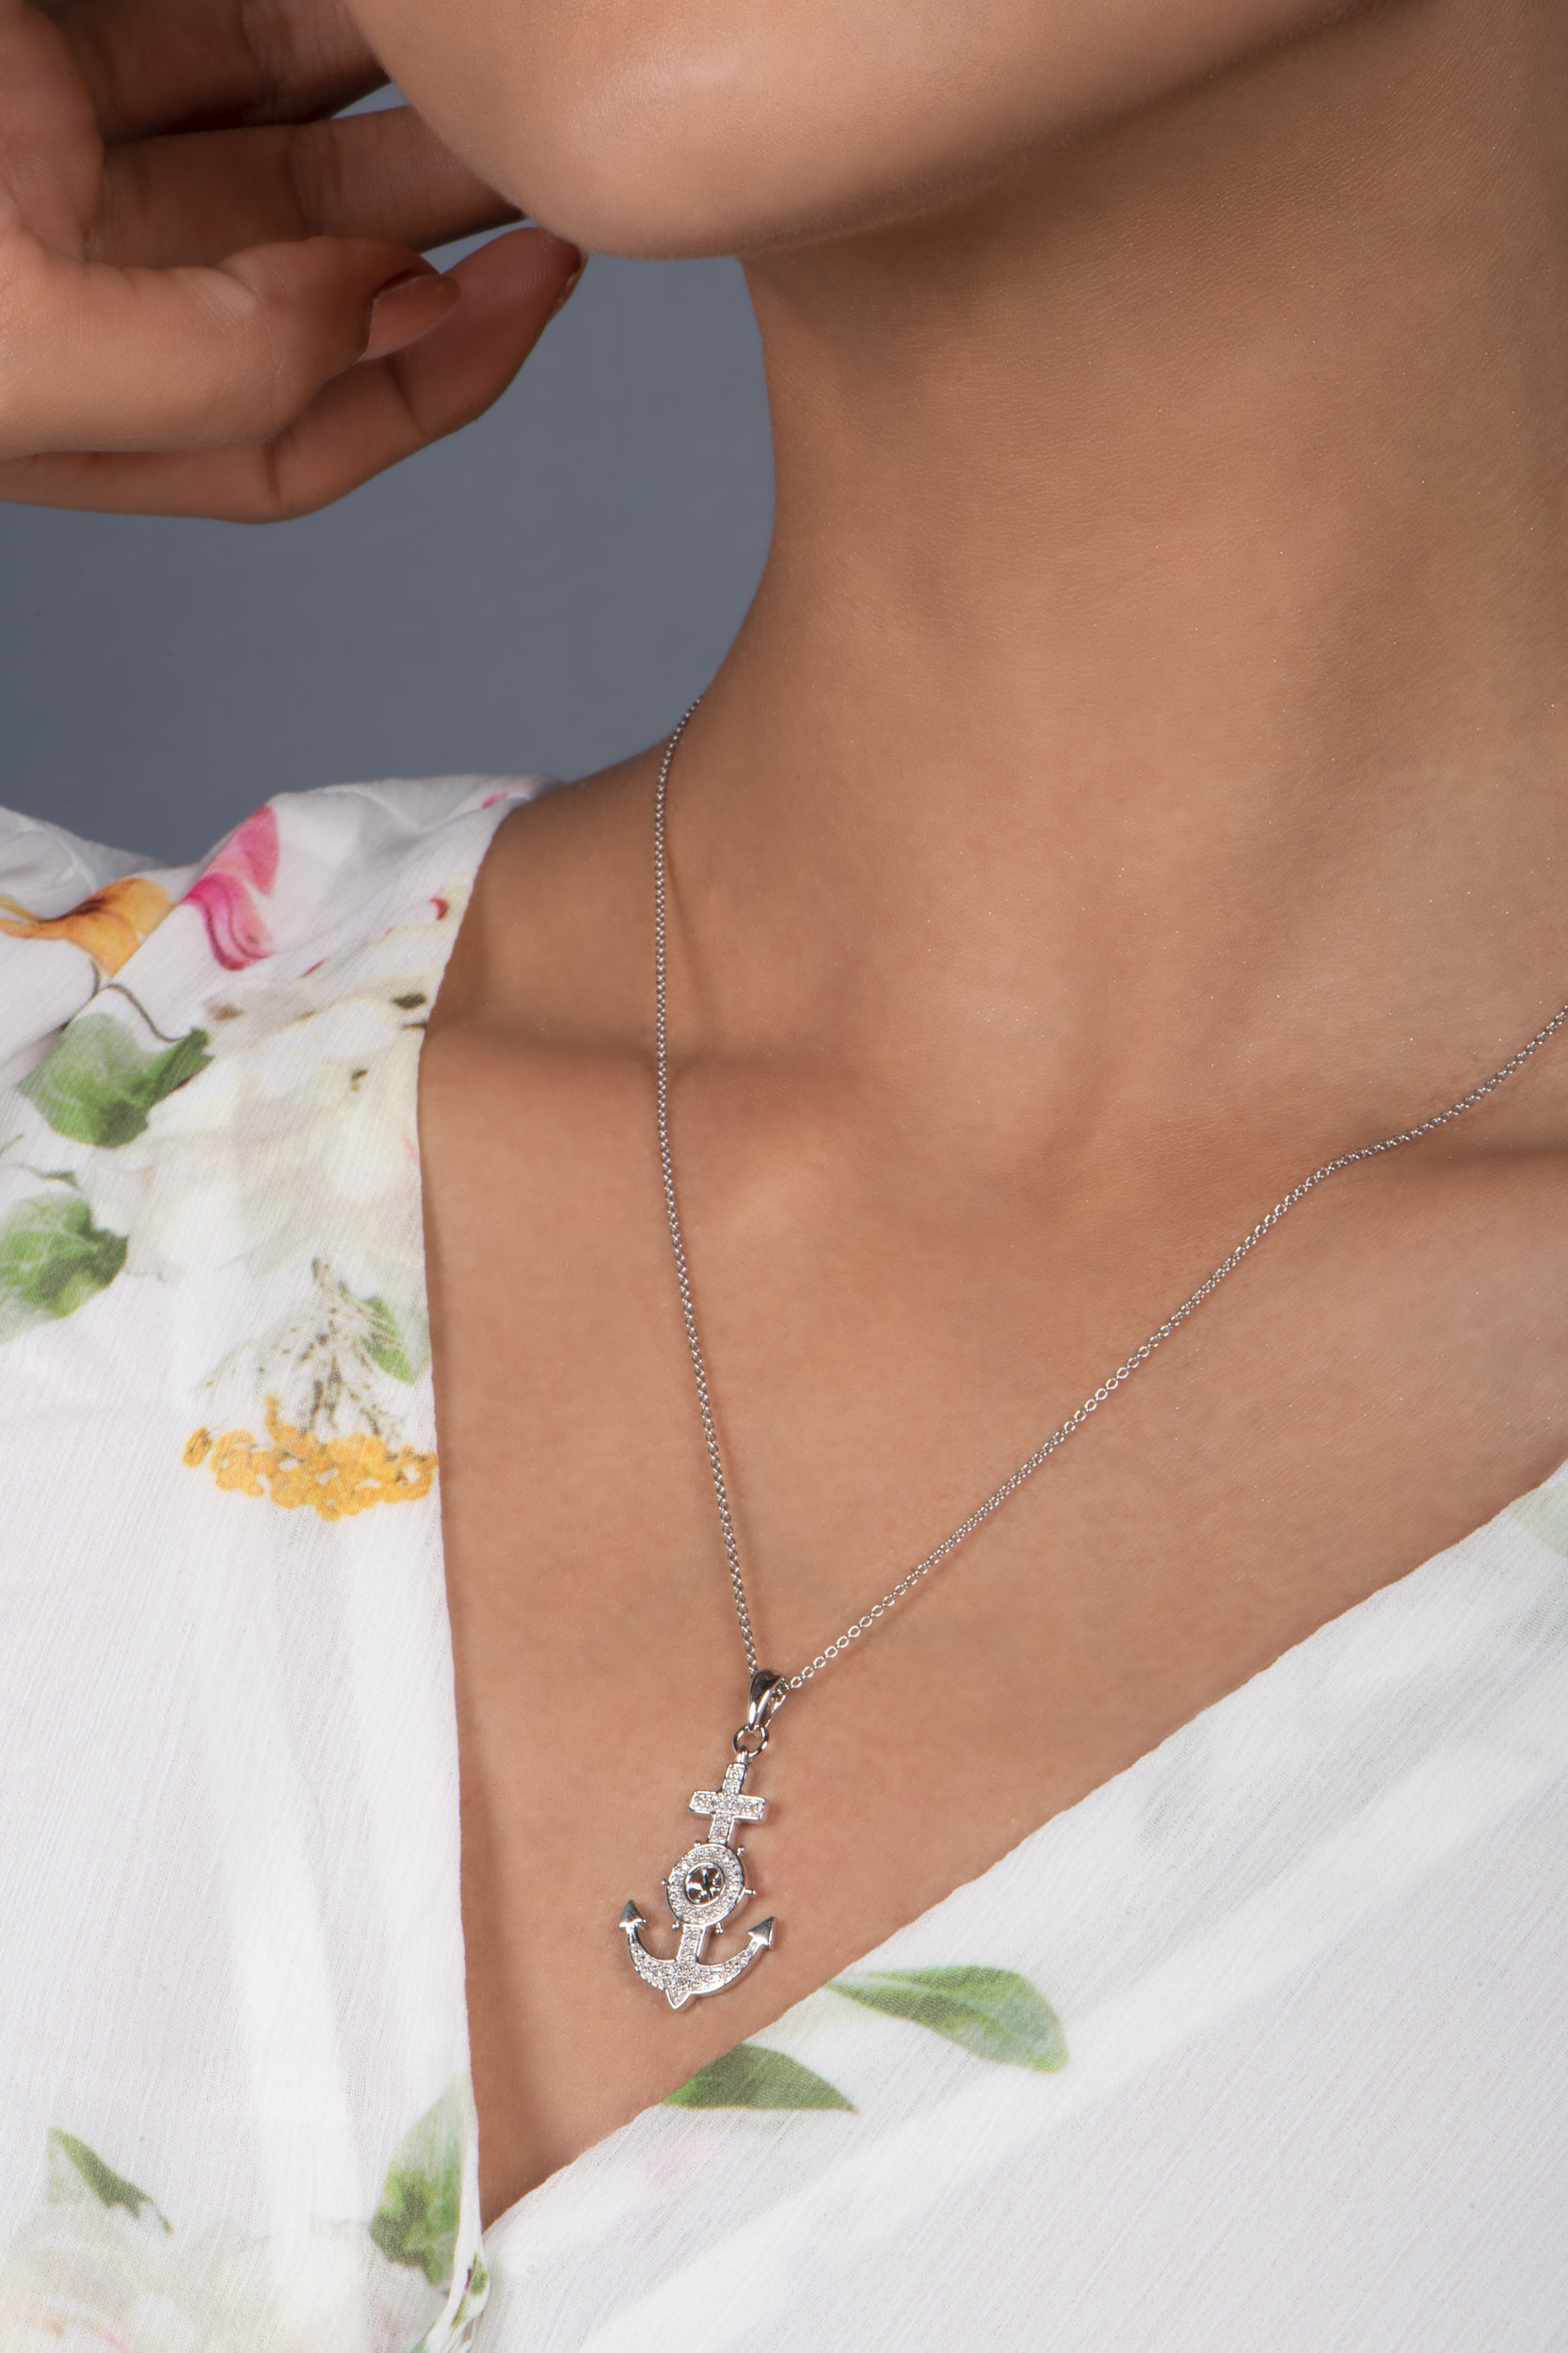 5 Anchor Jewelry Pieces You Can Gift